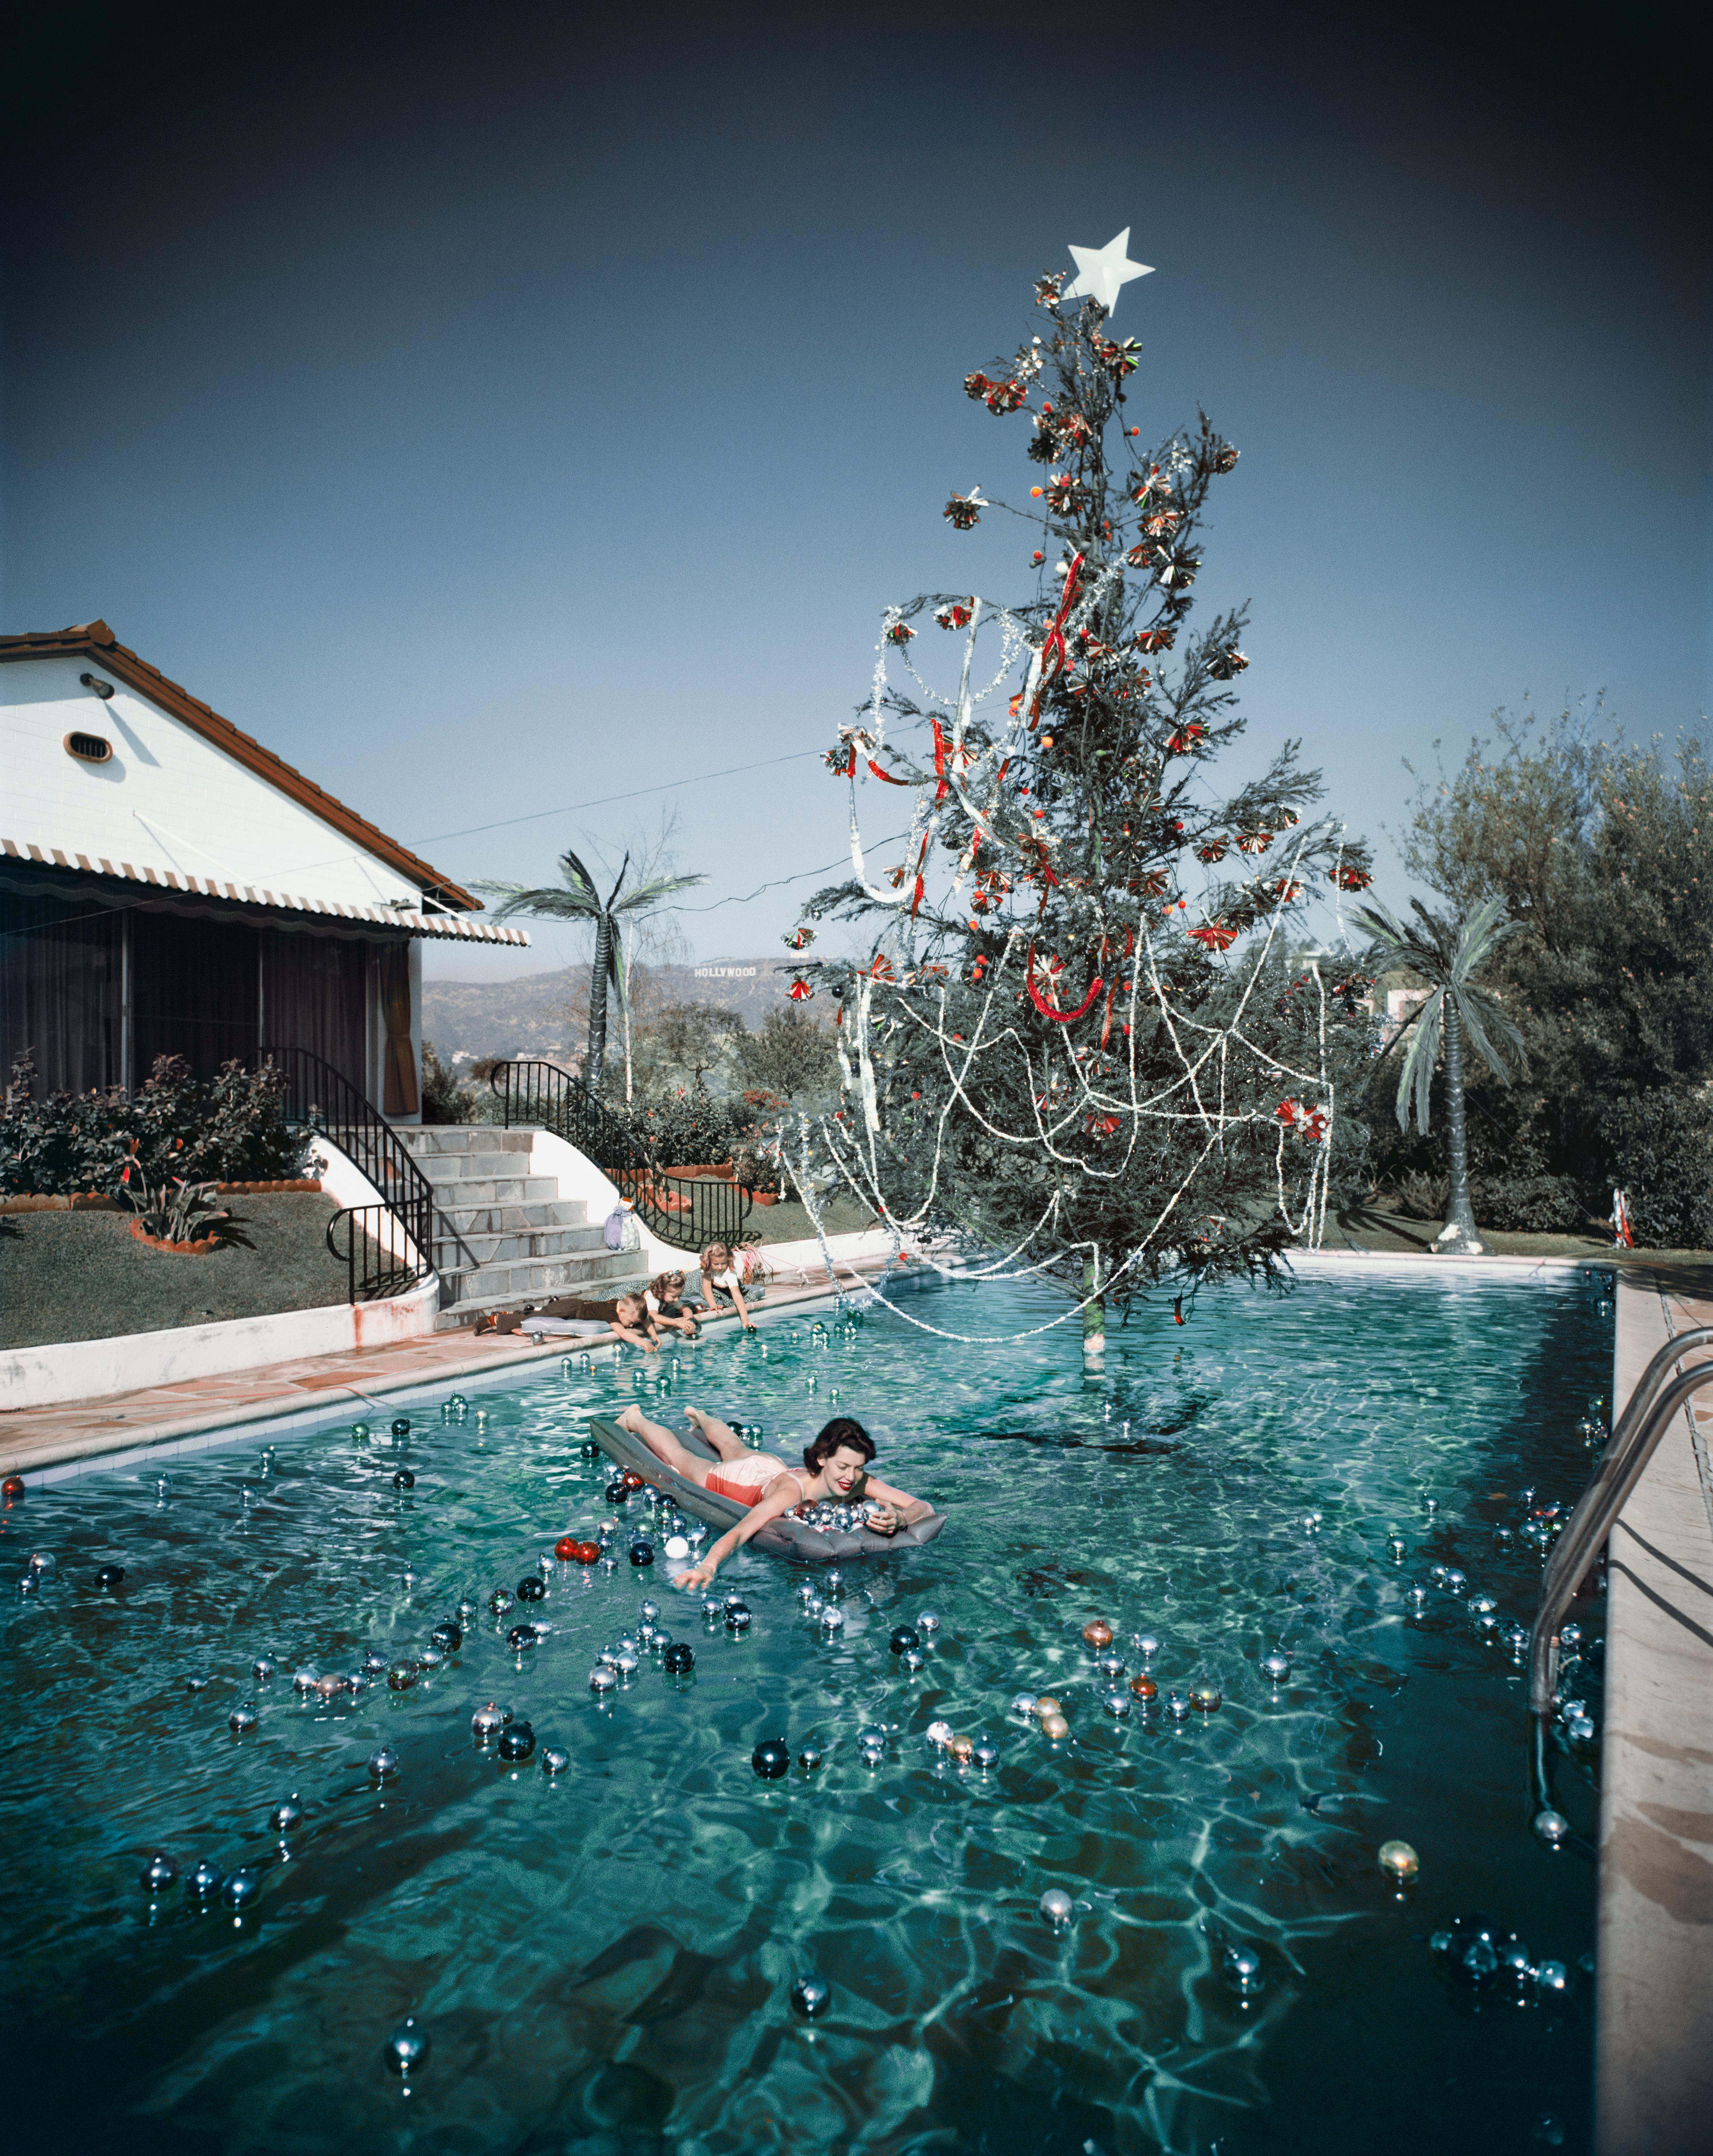 Rita Aarons, wife of photographer Slim Aarons, on a lilo in a swimming pool decorated for Christmas, Hollywood, 1954. The Hollywood sign can be seen in the distance. 

Estate stamped and hand numbered edition of 150 with certificate of authenticity